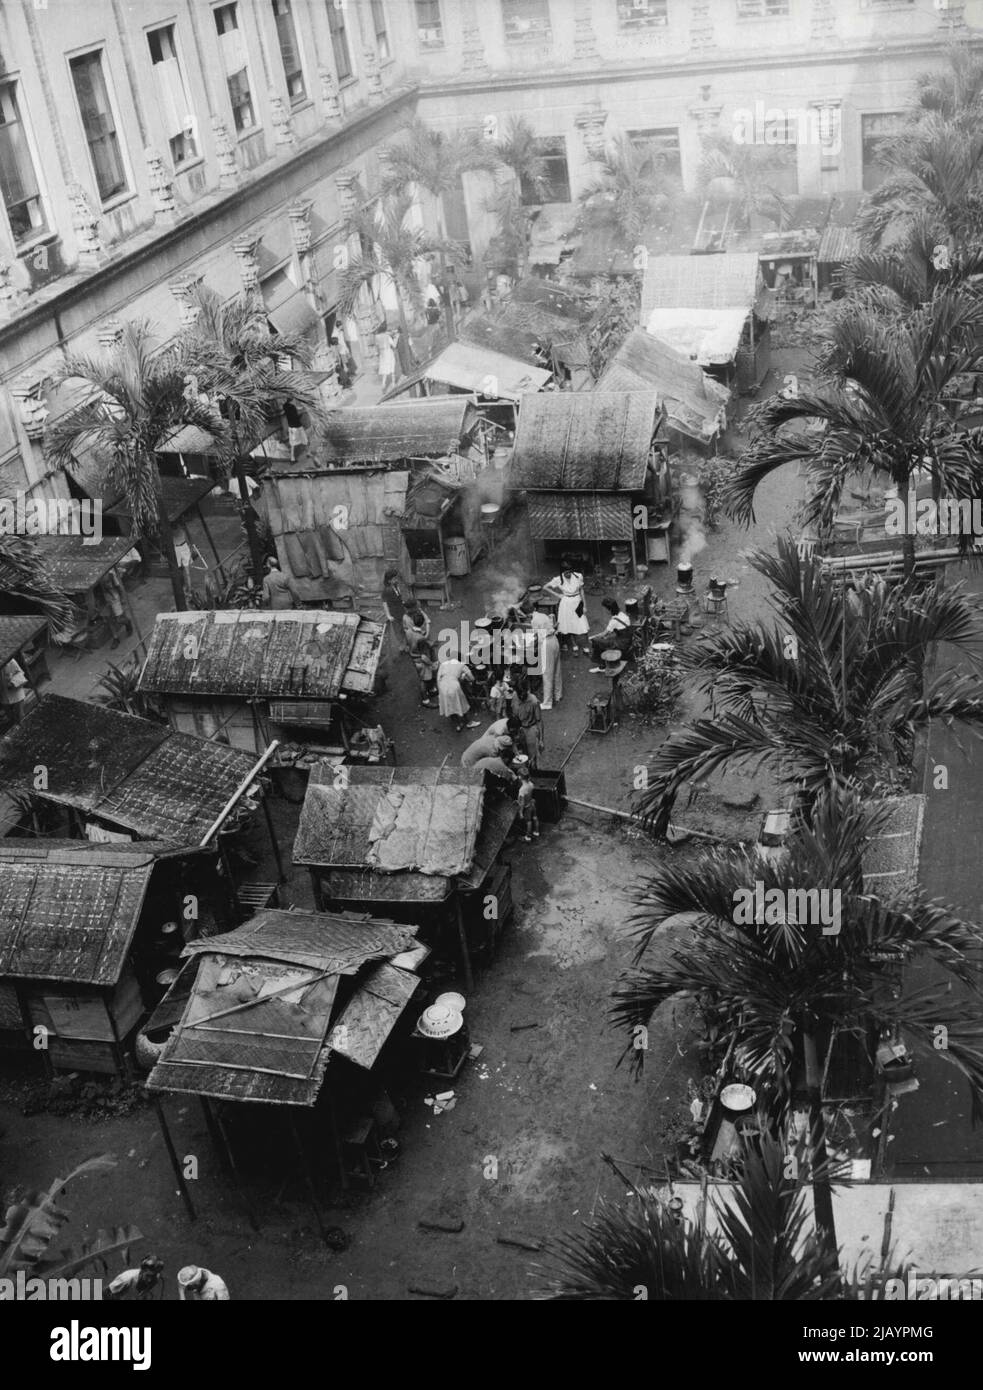 Home For Some 400 Internees -- These rudely constructed shanties at the rear of the Santa Tomas internment camp in Manila, P.I., were the homes of some 400 of the 3,700 internees who were freed by American troops Feb. 5 (Manila Time). The entry of the yanks ended three years imprisonment for the internees. February 13, 1945. (Photo by Associated Press Photo). Stock Photo